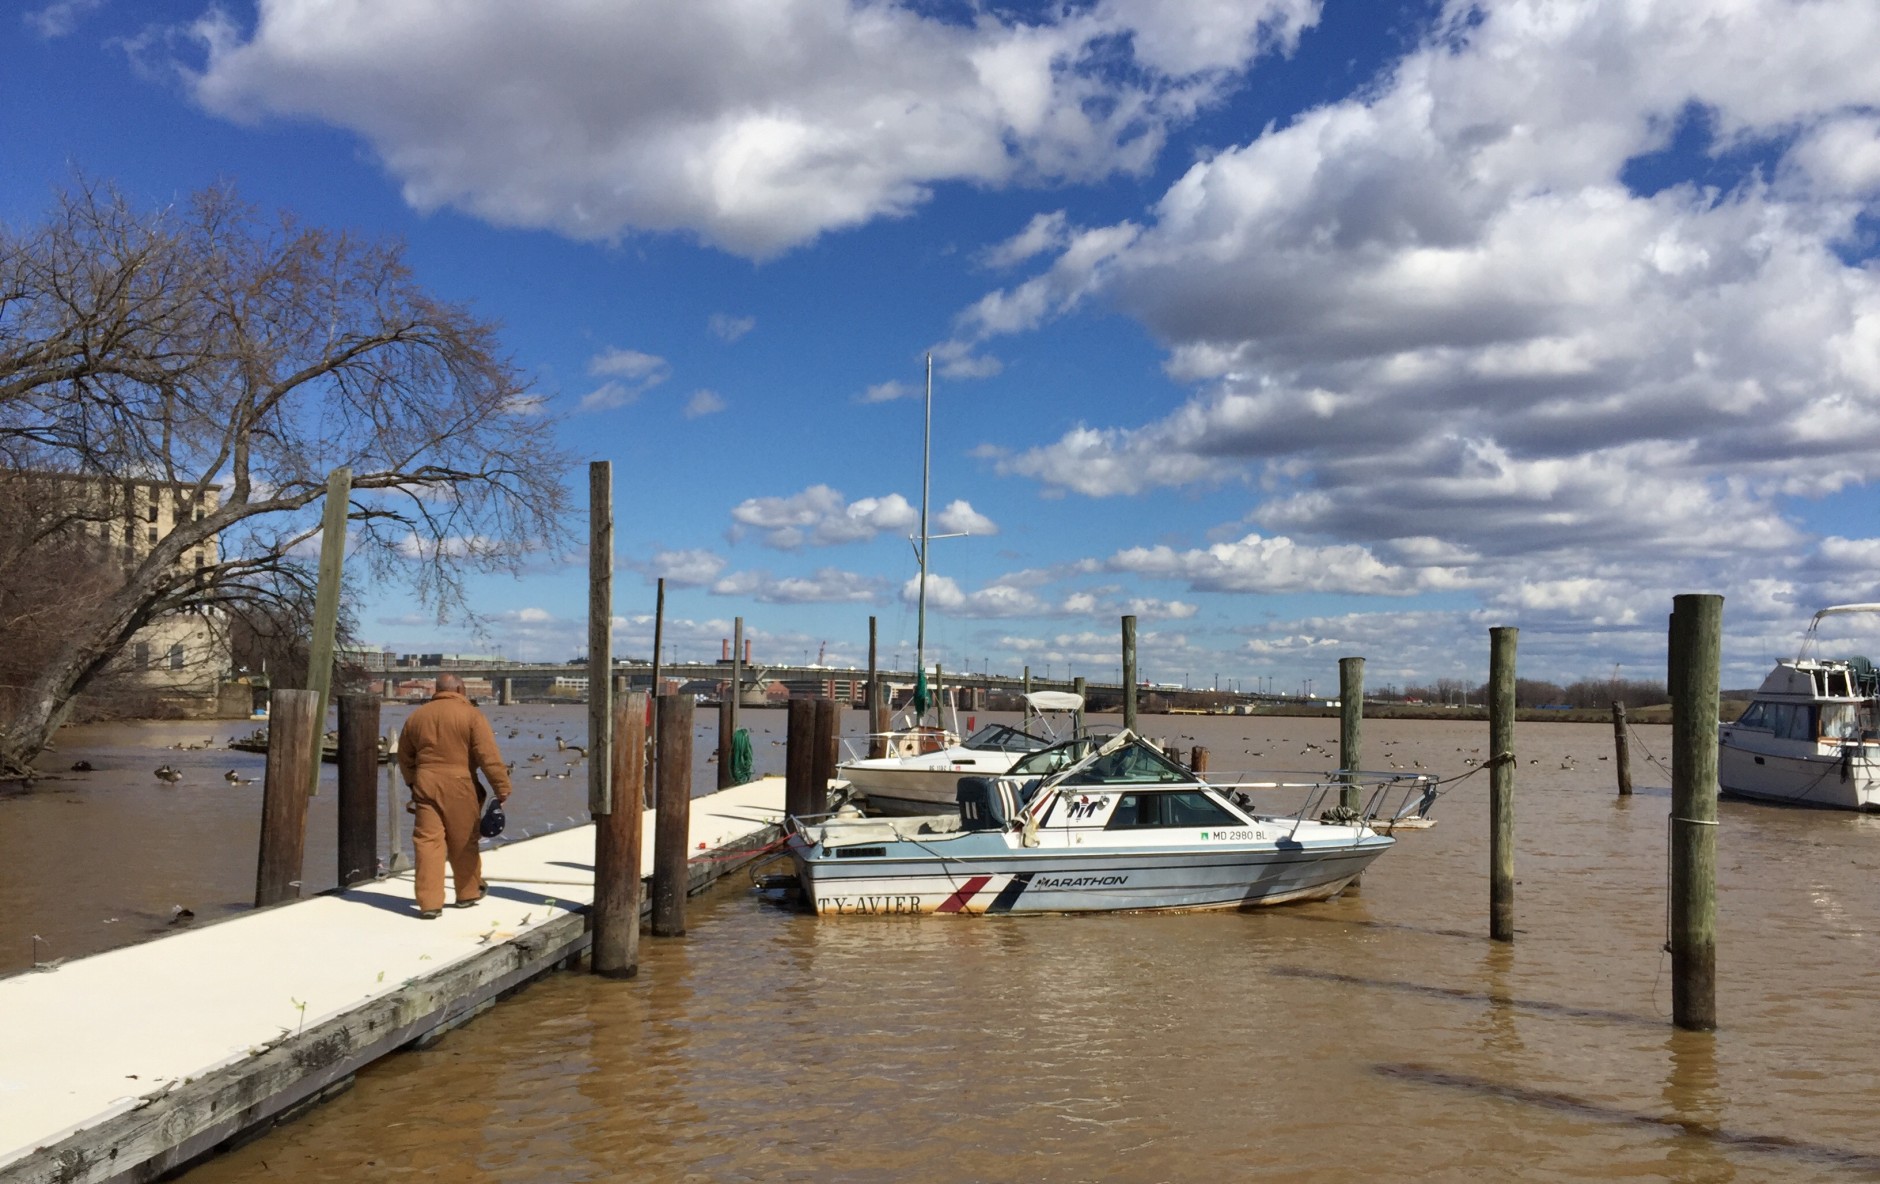 "Buzzard Point [Marina] provides the lowest coast for boat owners anywhere in the D.C. area," said Richard Henry of Oxon, Hill. Henry says slip costs can be two to three times more expensive elsewhere. He intends to bring his boat to a marina near the Rt. 301 Nice Bridge in Southern Maryland. (WTOP/Kristi King)